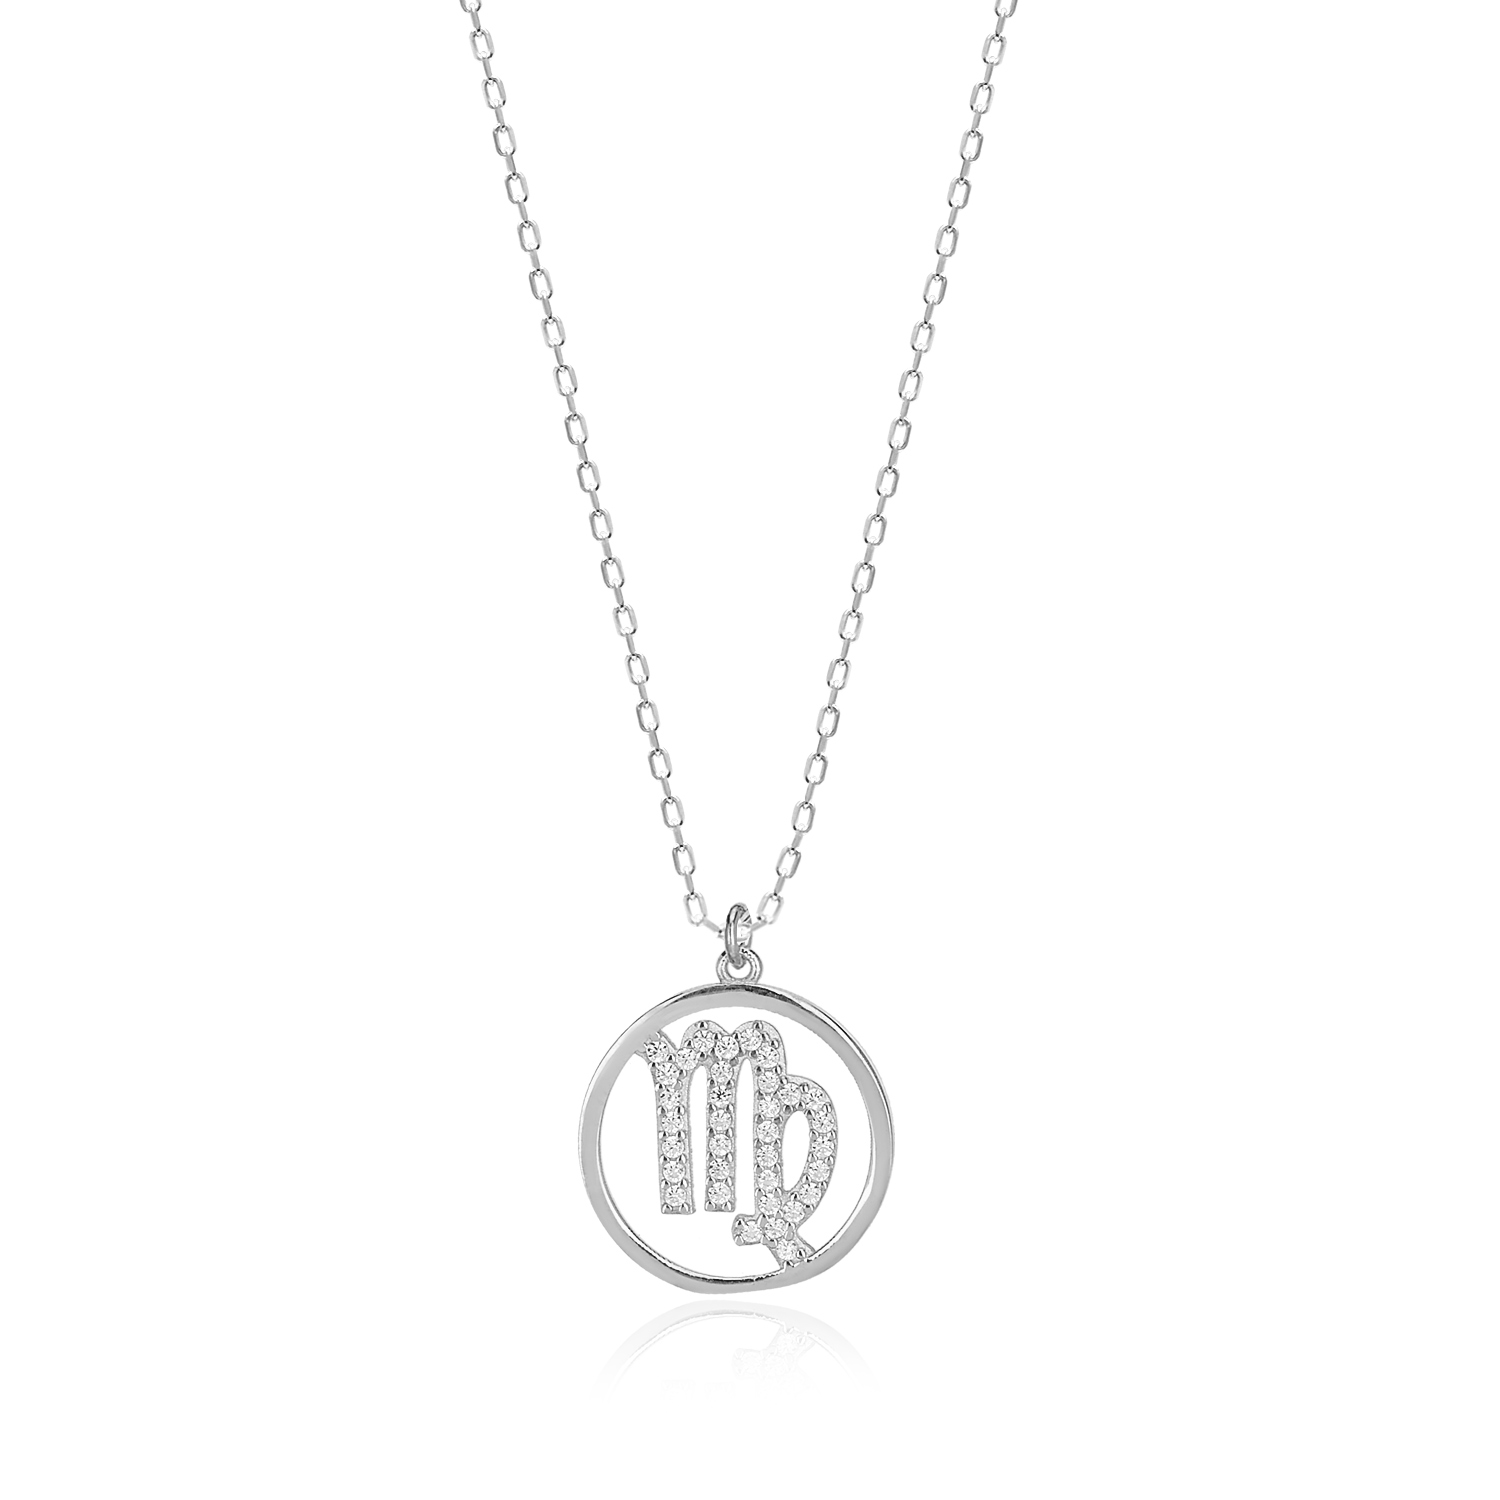 925-sterling-silver-horoscope-necklace-with-cubic-zircon